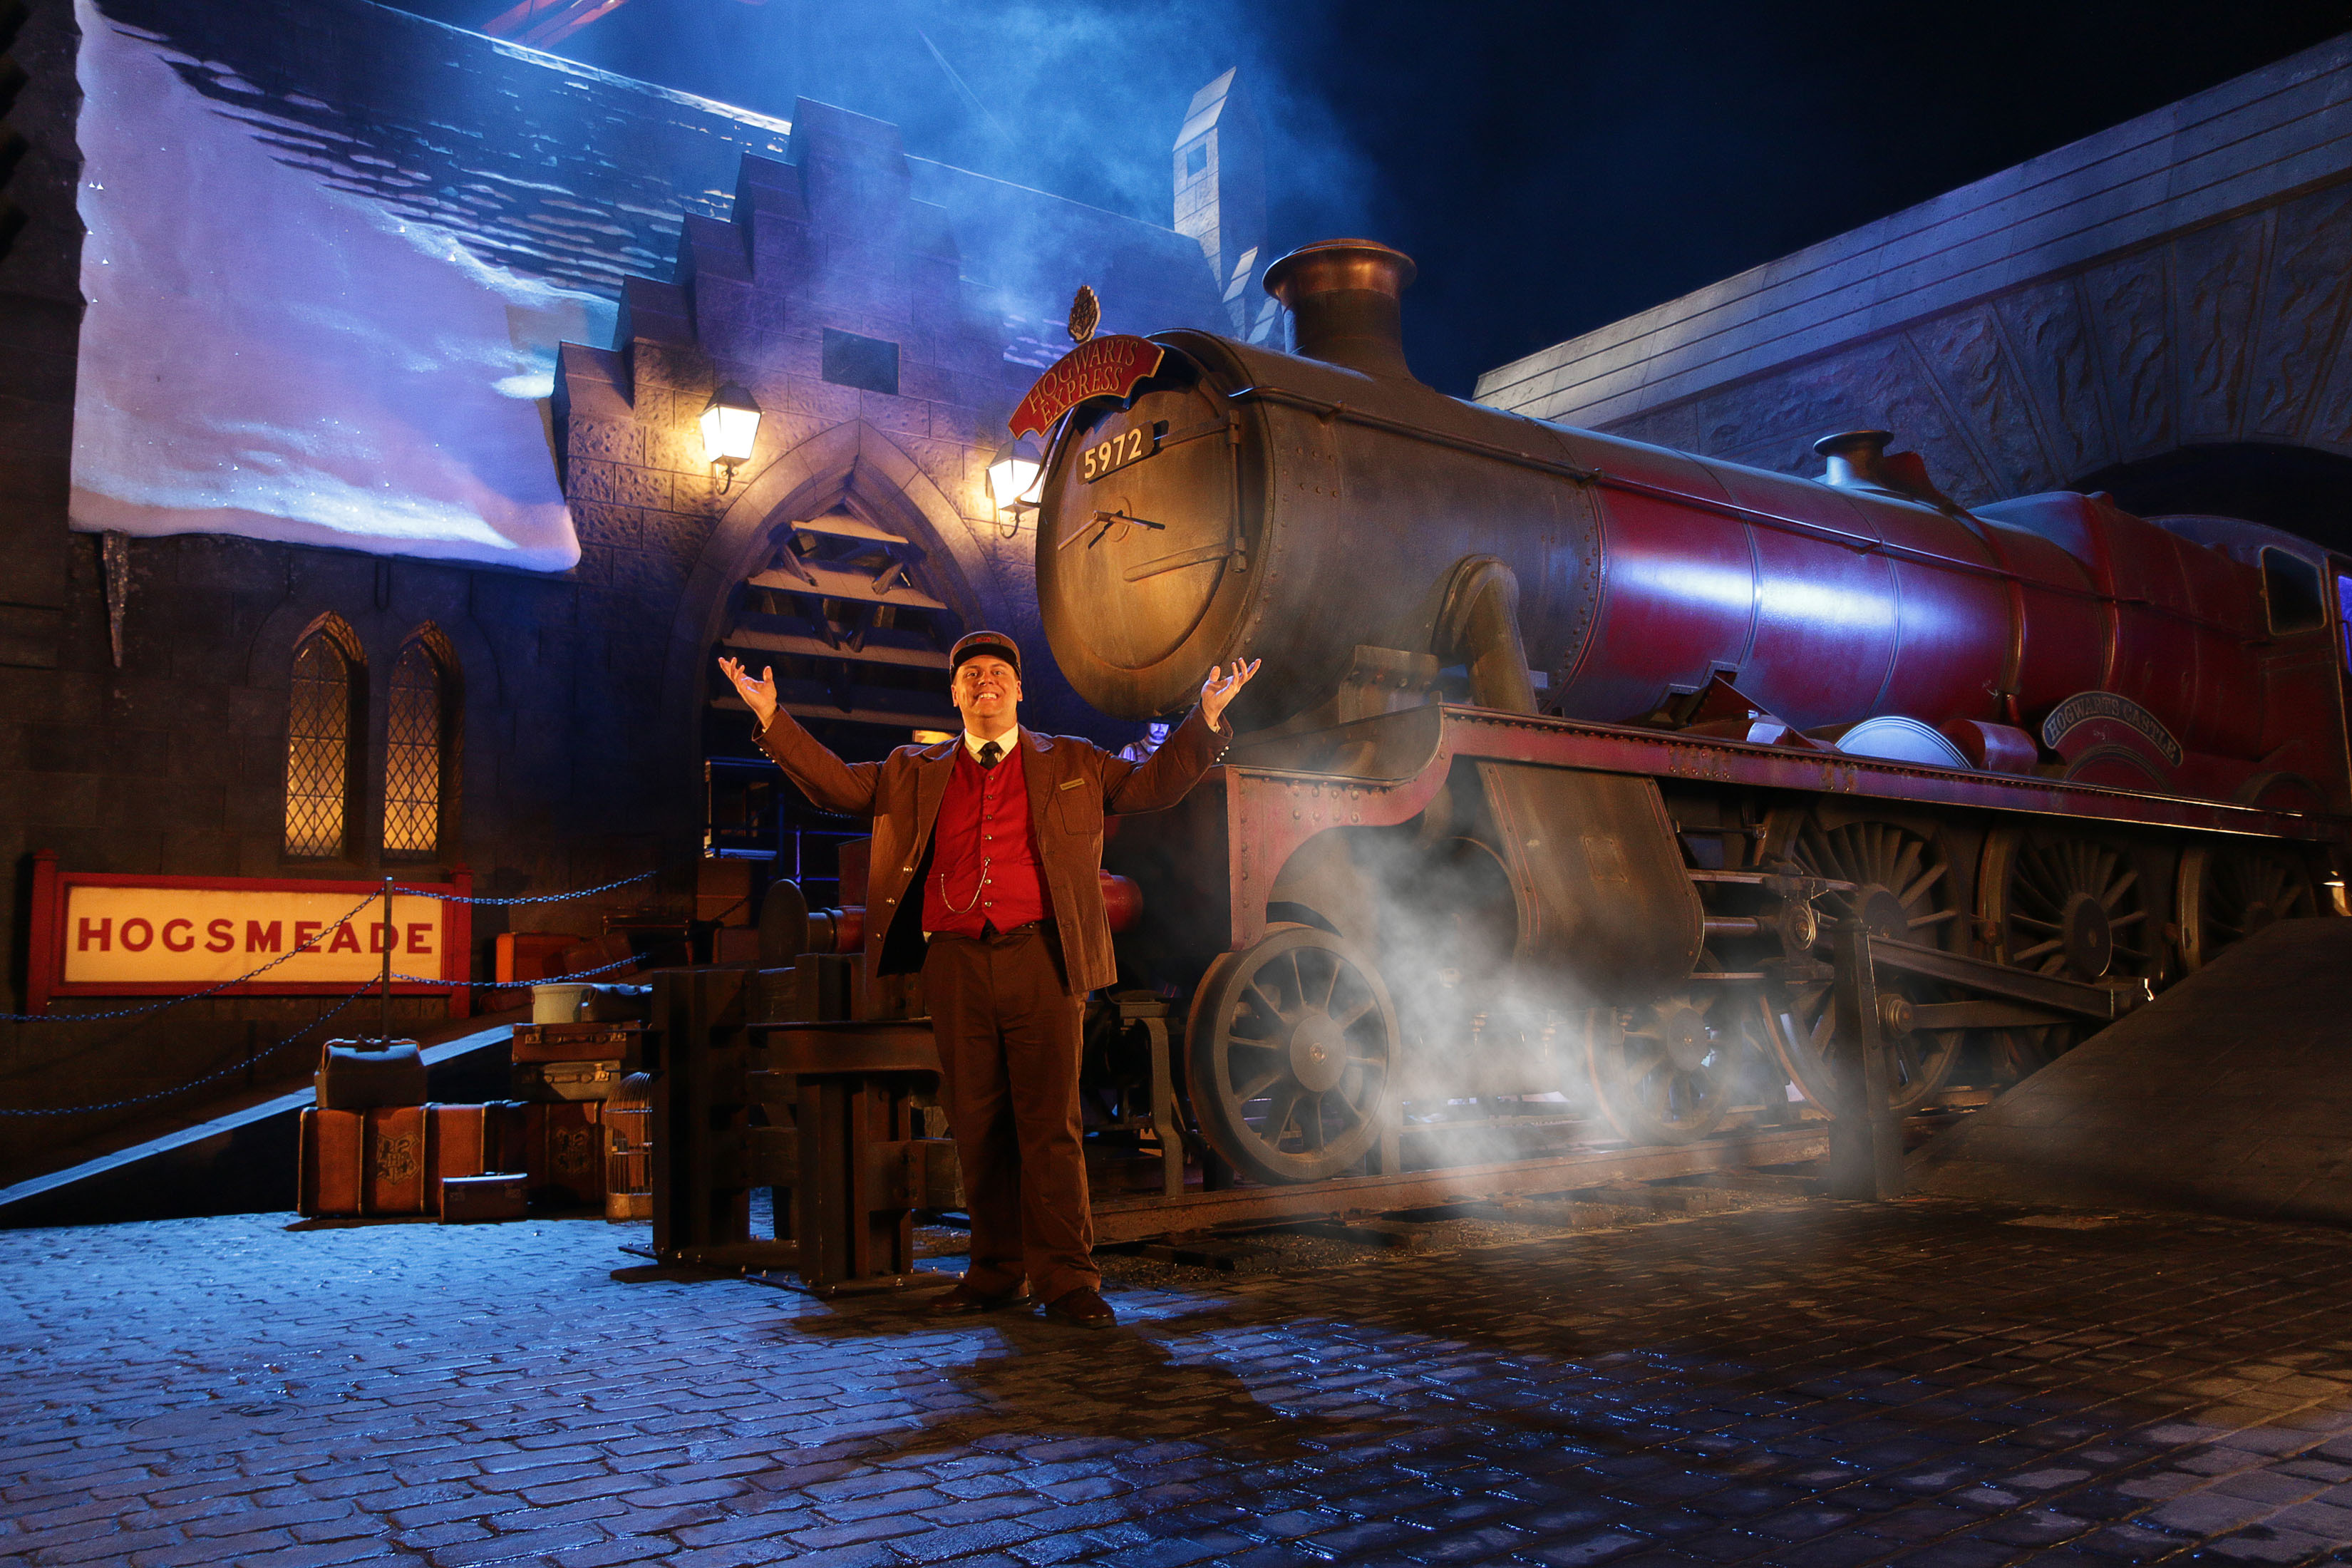 1st Look: ‘The Wizarding World of Harry Potter’ at Universal Studios Hollywood